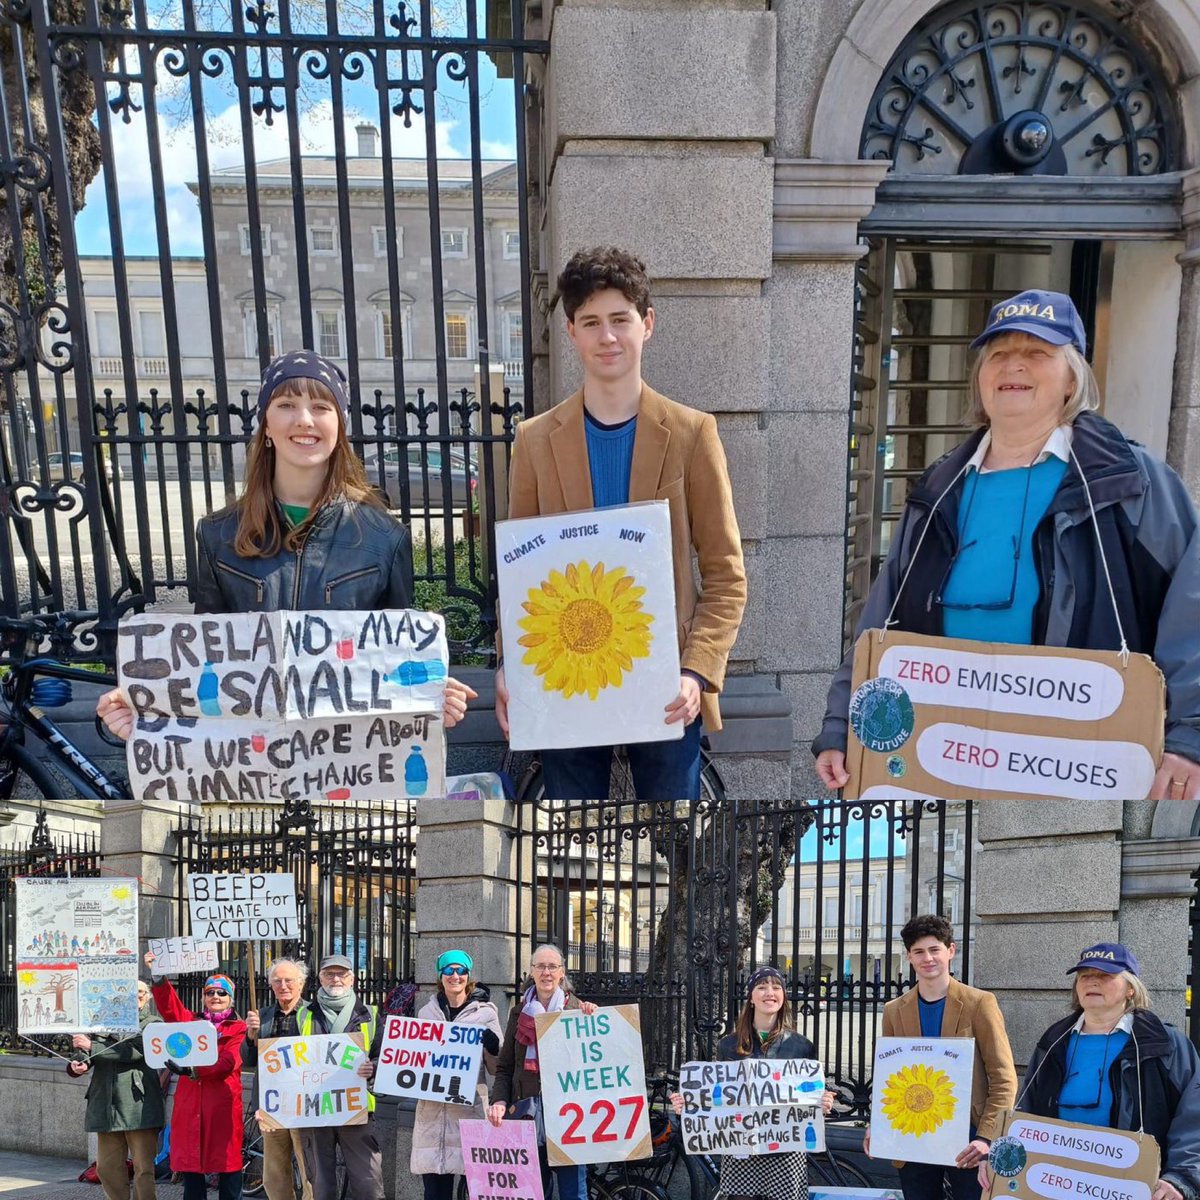 Week 227 #ClimateStrike 
This week President Joe Biden is in Ireland travelling around making loads of speeches but none of them are about climate change funnily enough! #willowproject @POTUS @GretaThunberg @SchoolStrikesIE @Fridays4future   #climatechange #peoplenotprofit